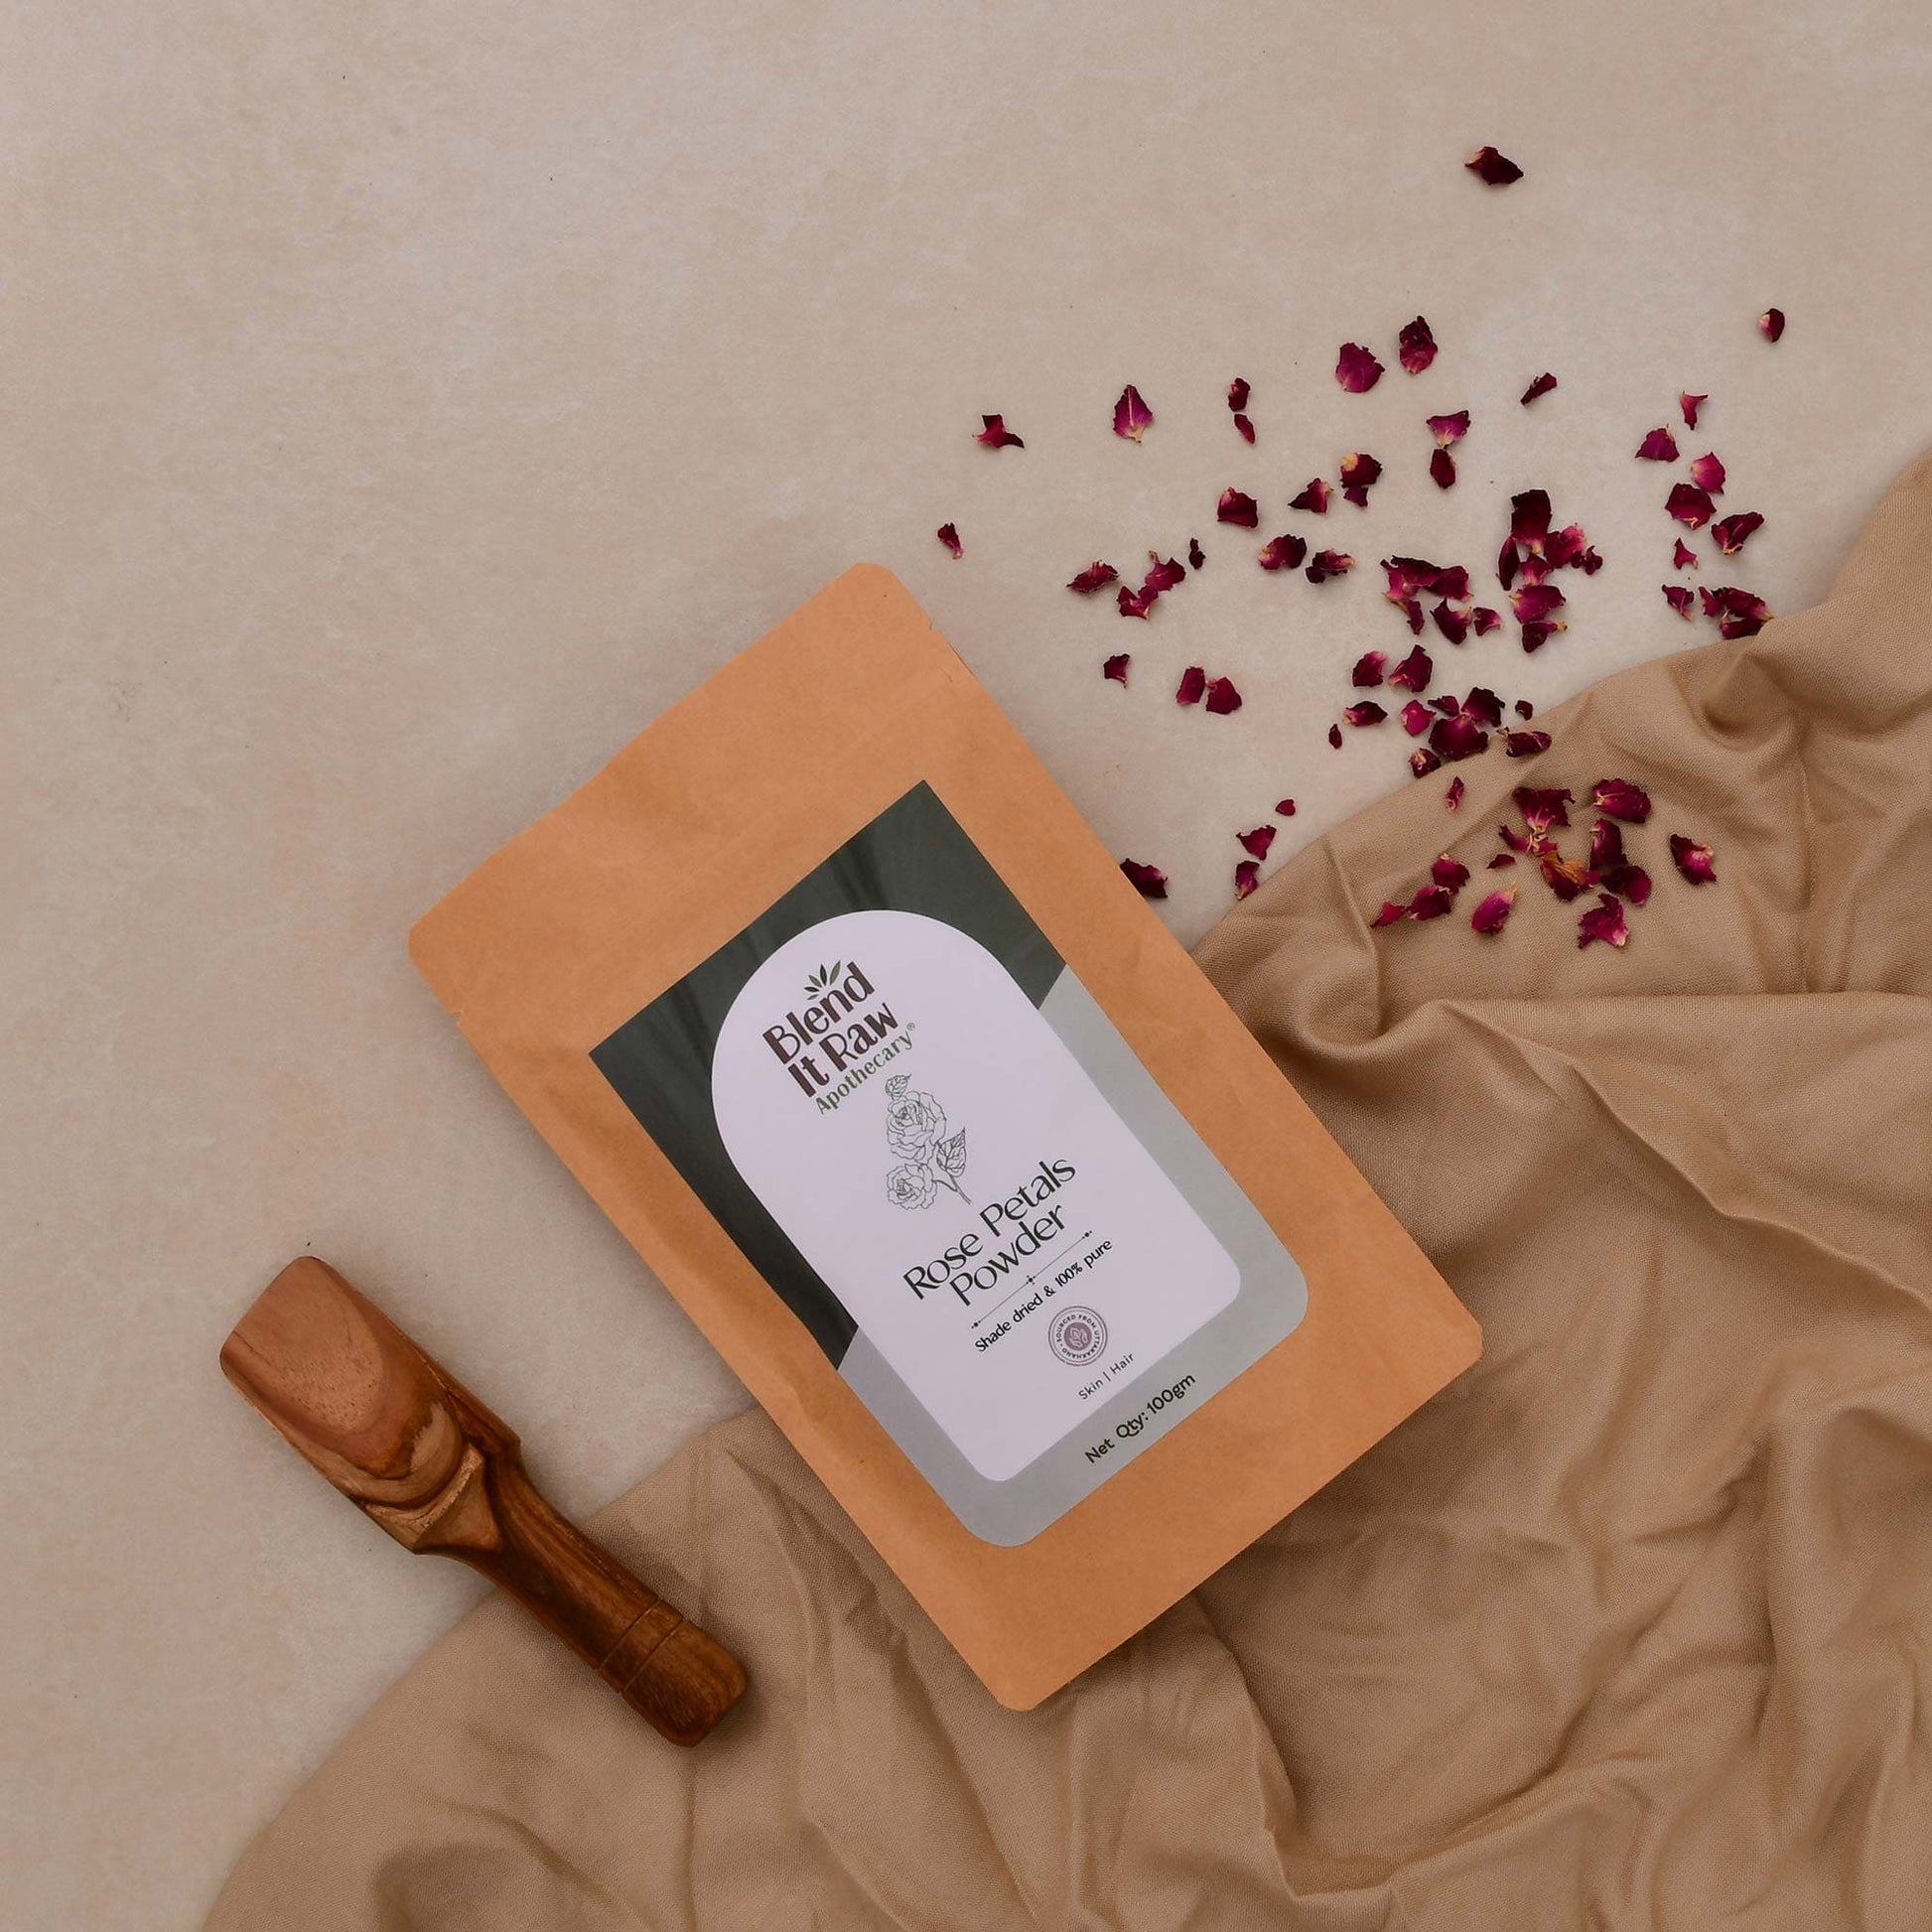 Dried rose petals - Blend It Raw Apothecary